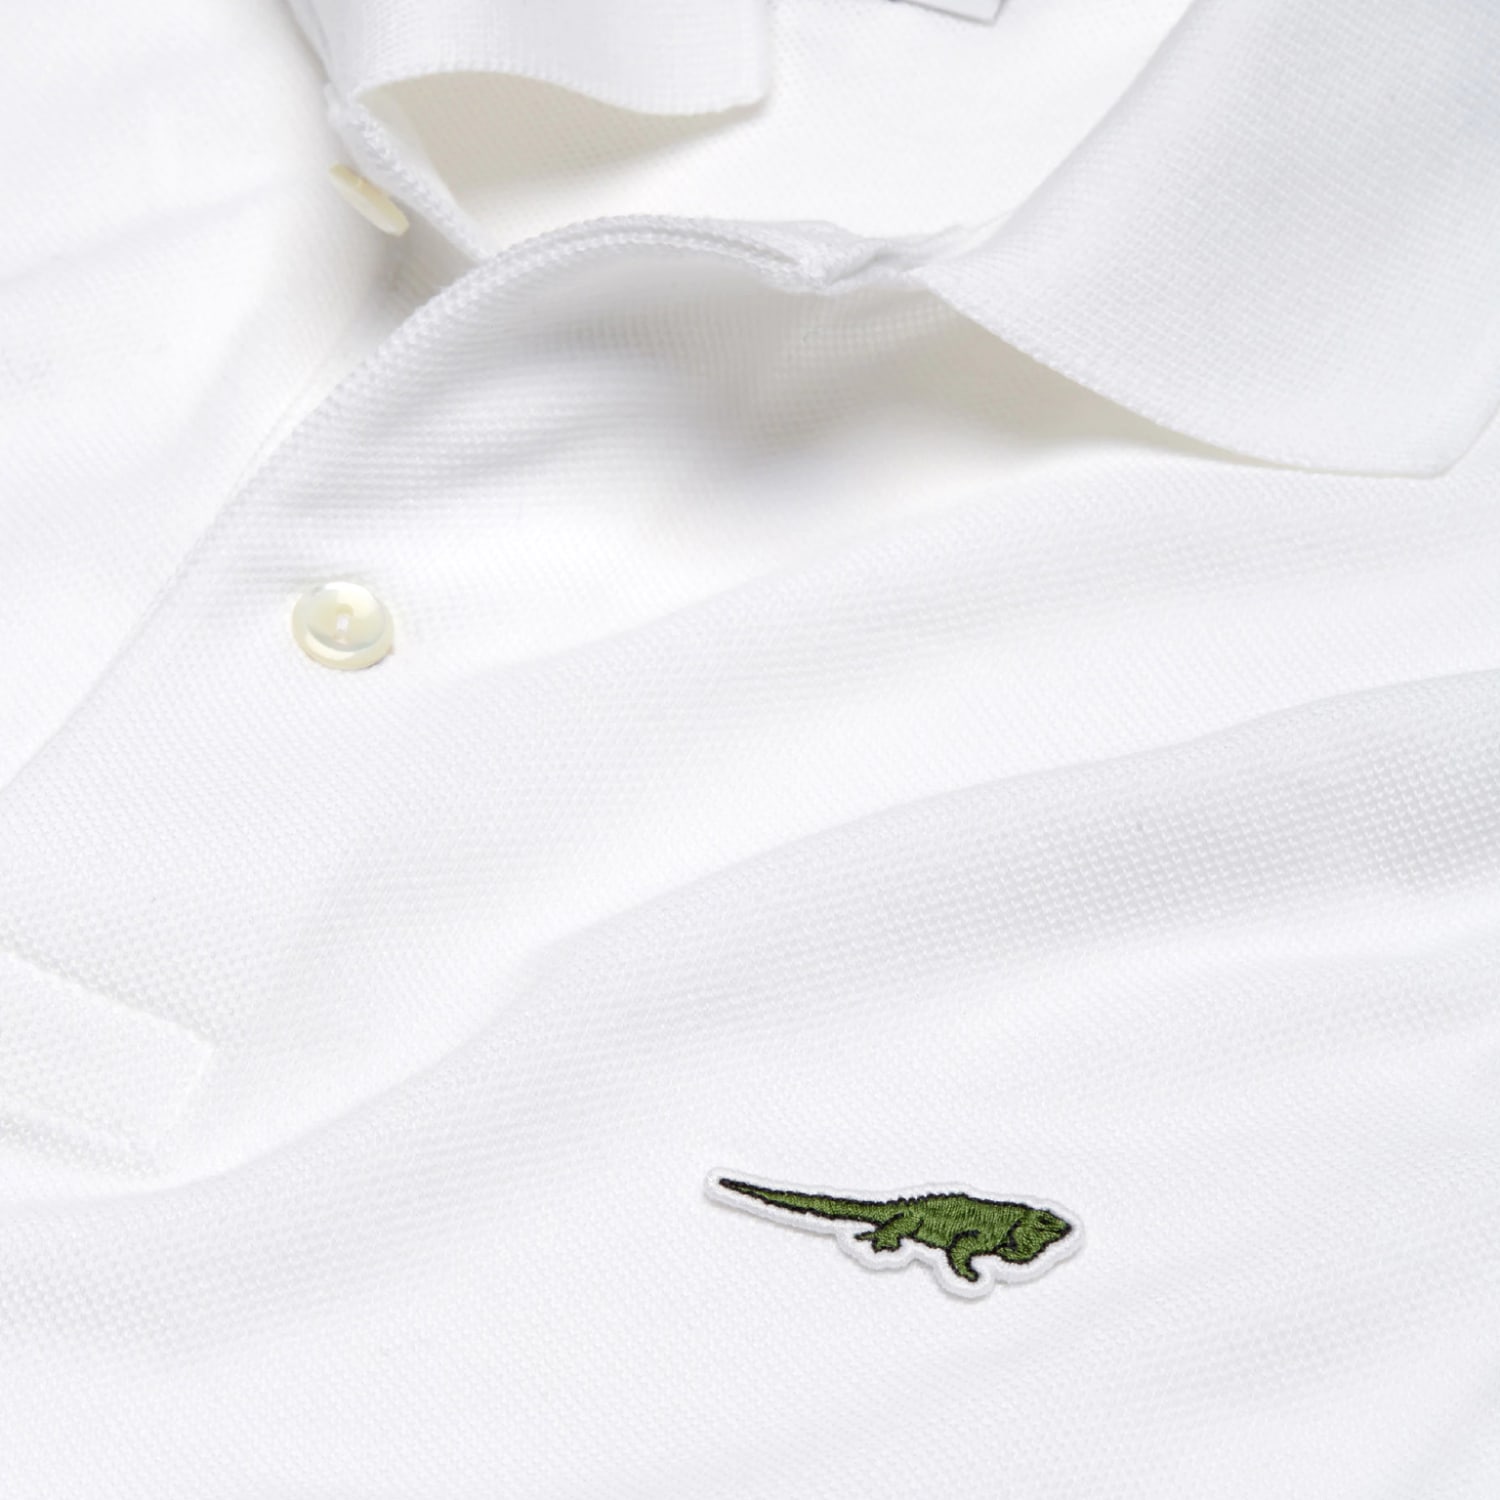 Lacoste replaces crocodile logo with endangered